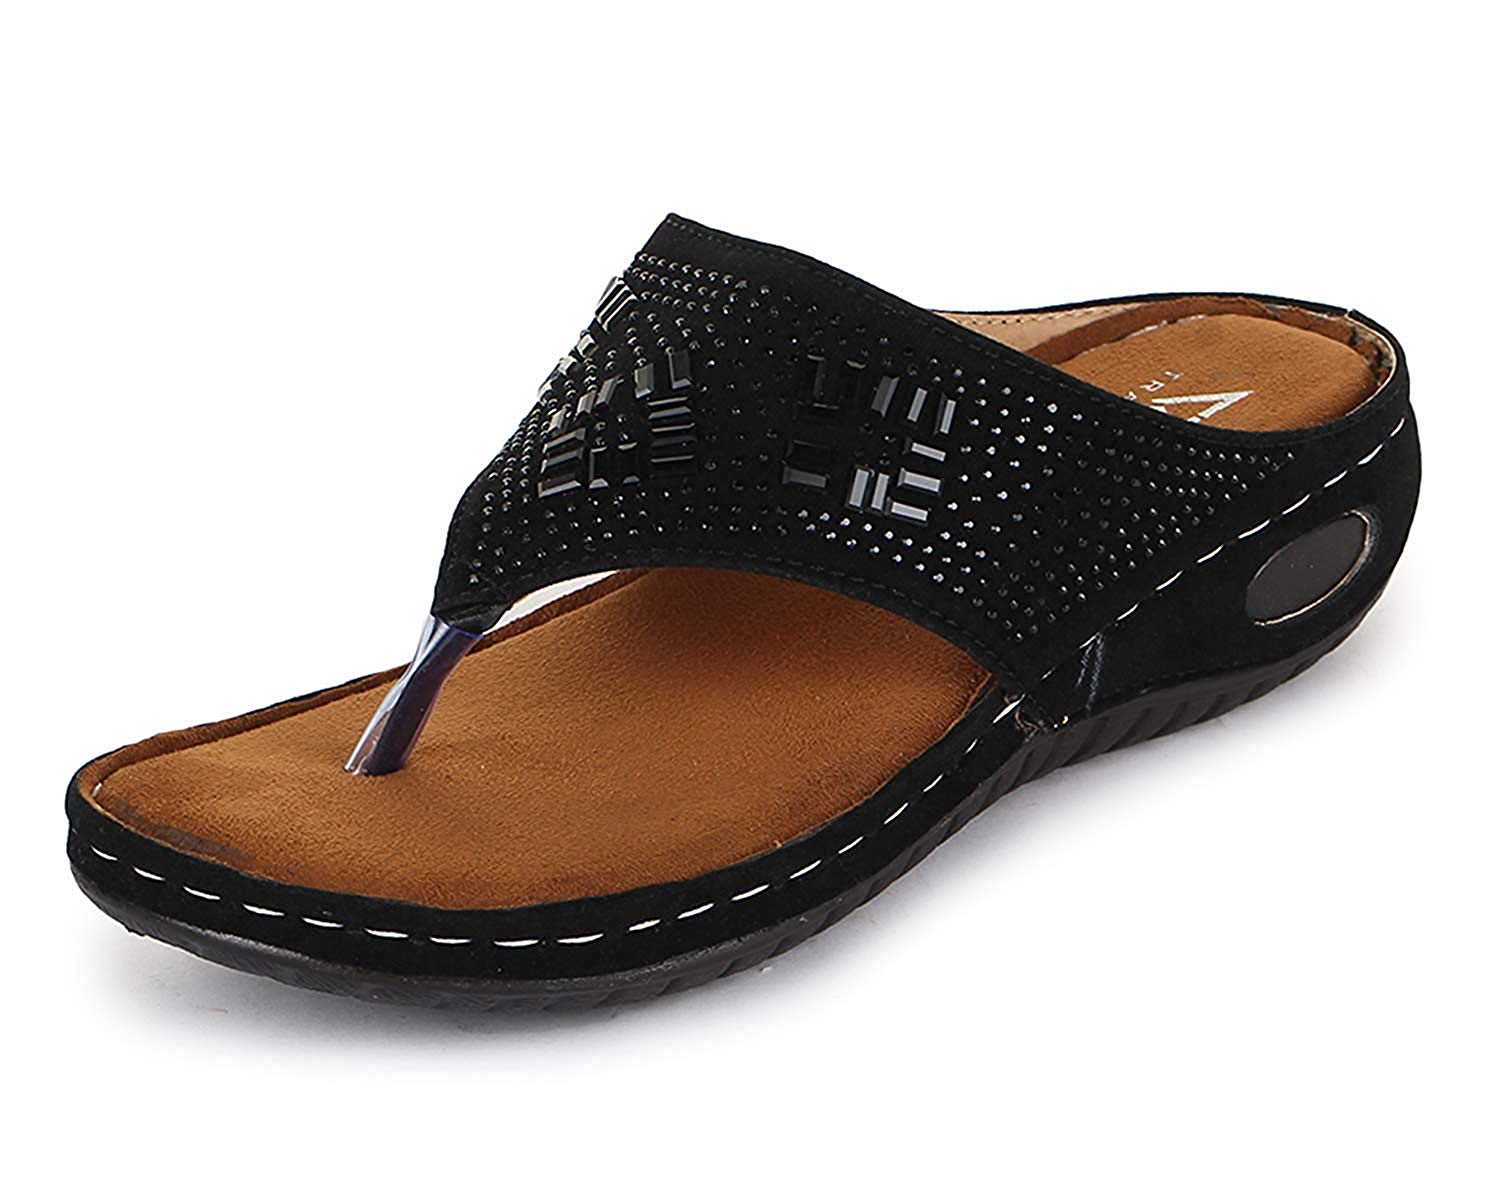 TRASE Erica-I Black Tan Soft Comfortable Fancy Slippers for Women Price in India